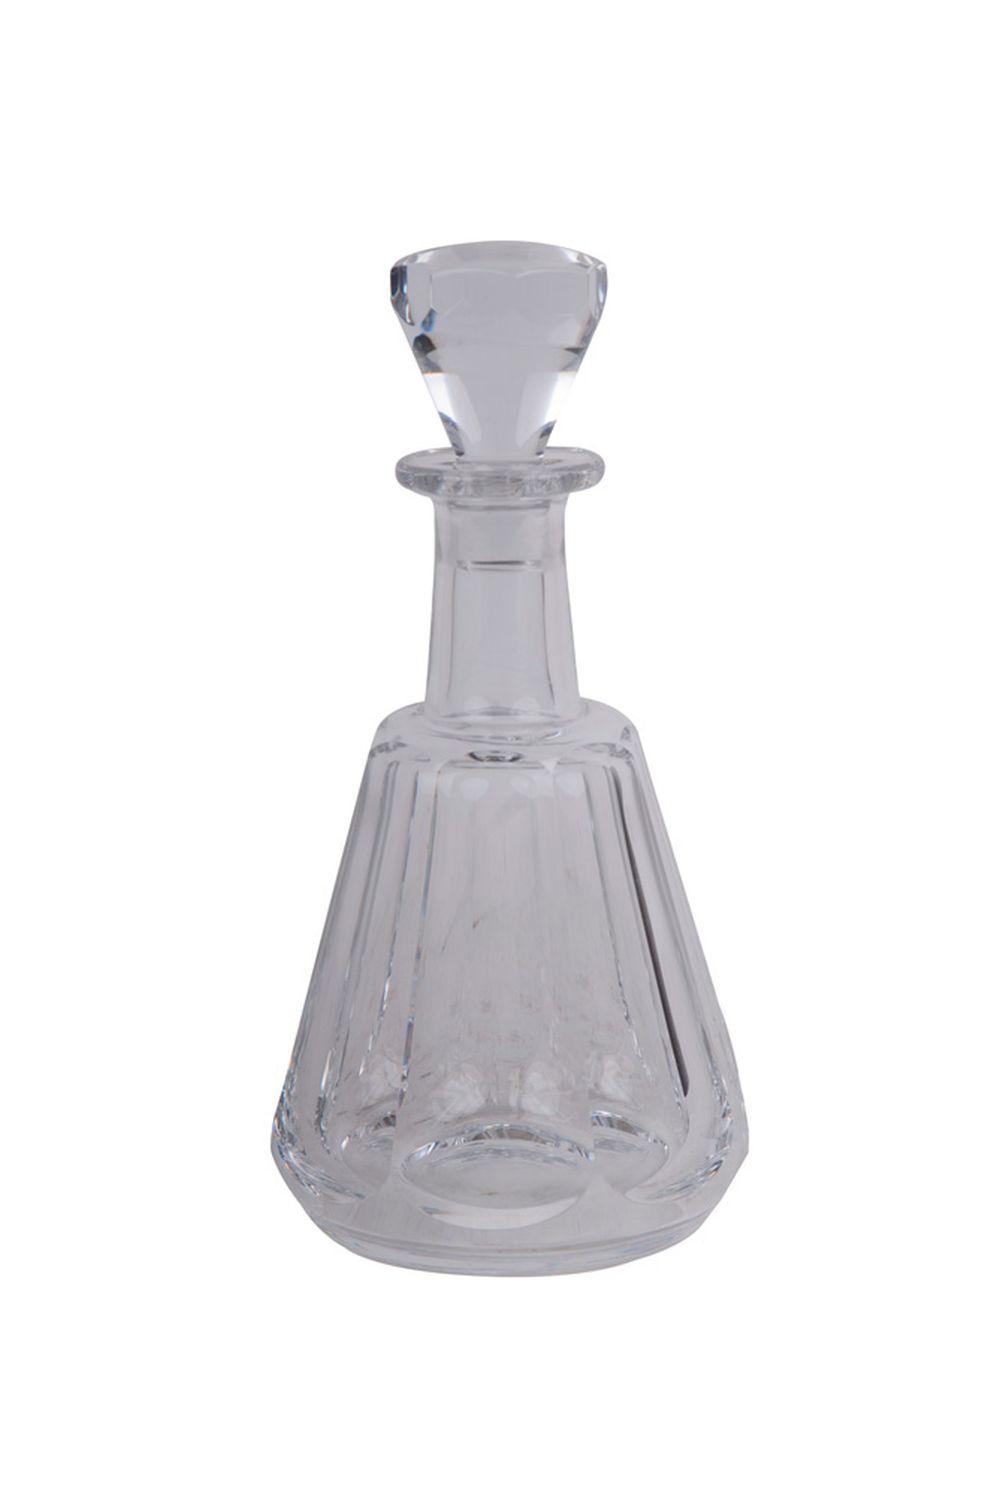 BACCARAT MOLDED GLASS DECANTER10 inches